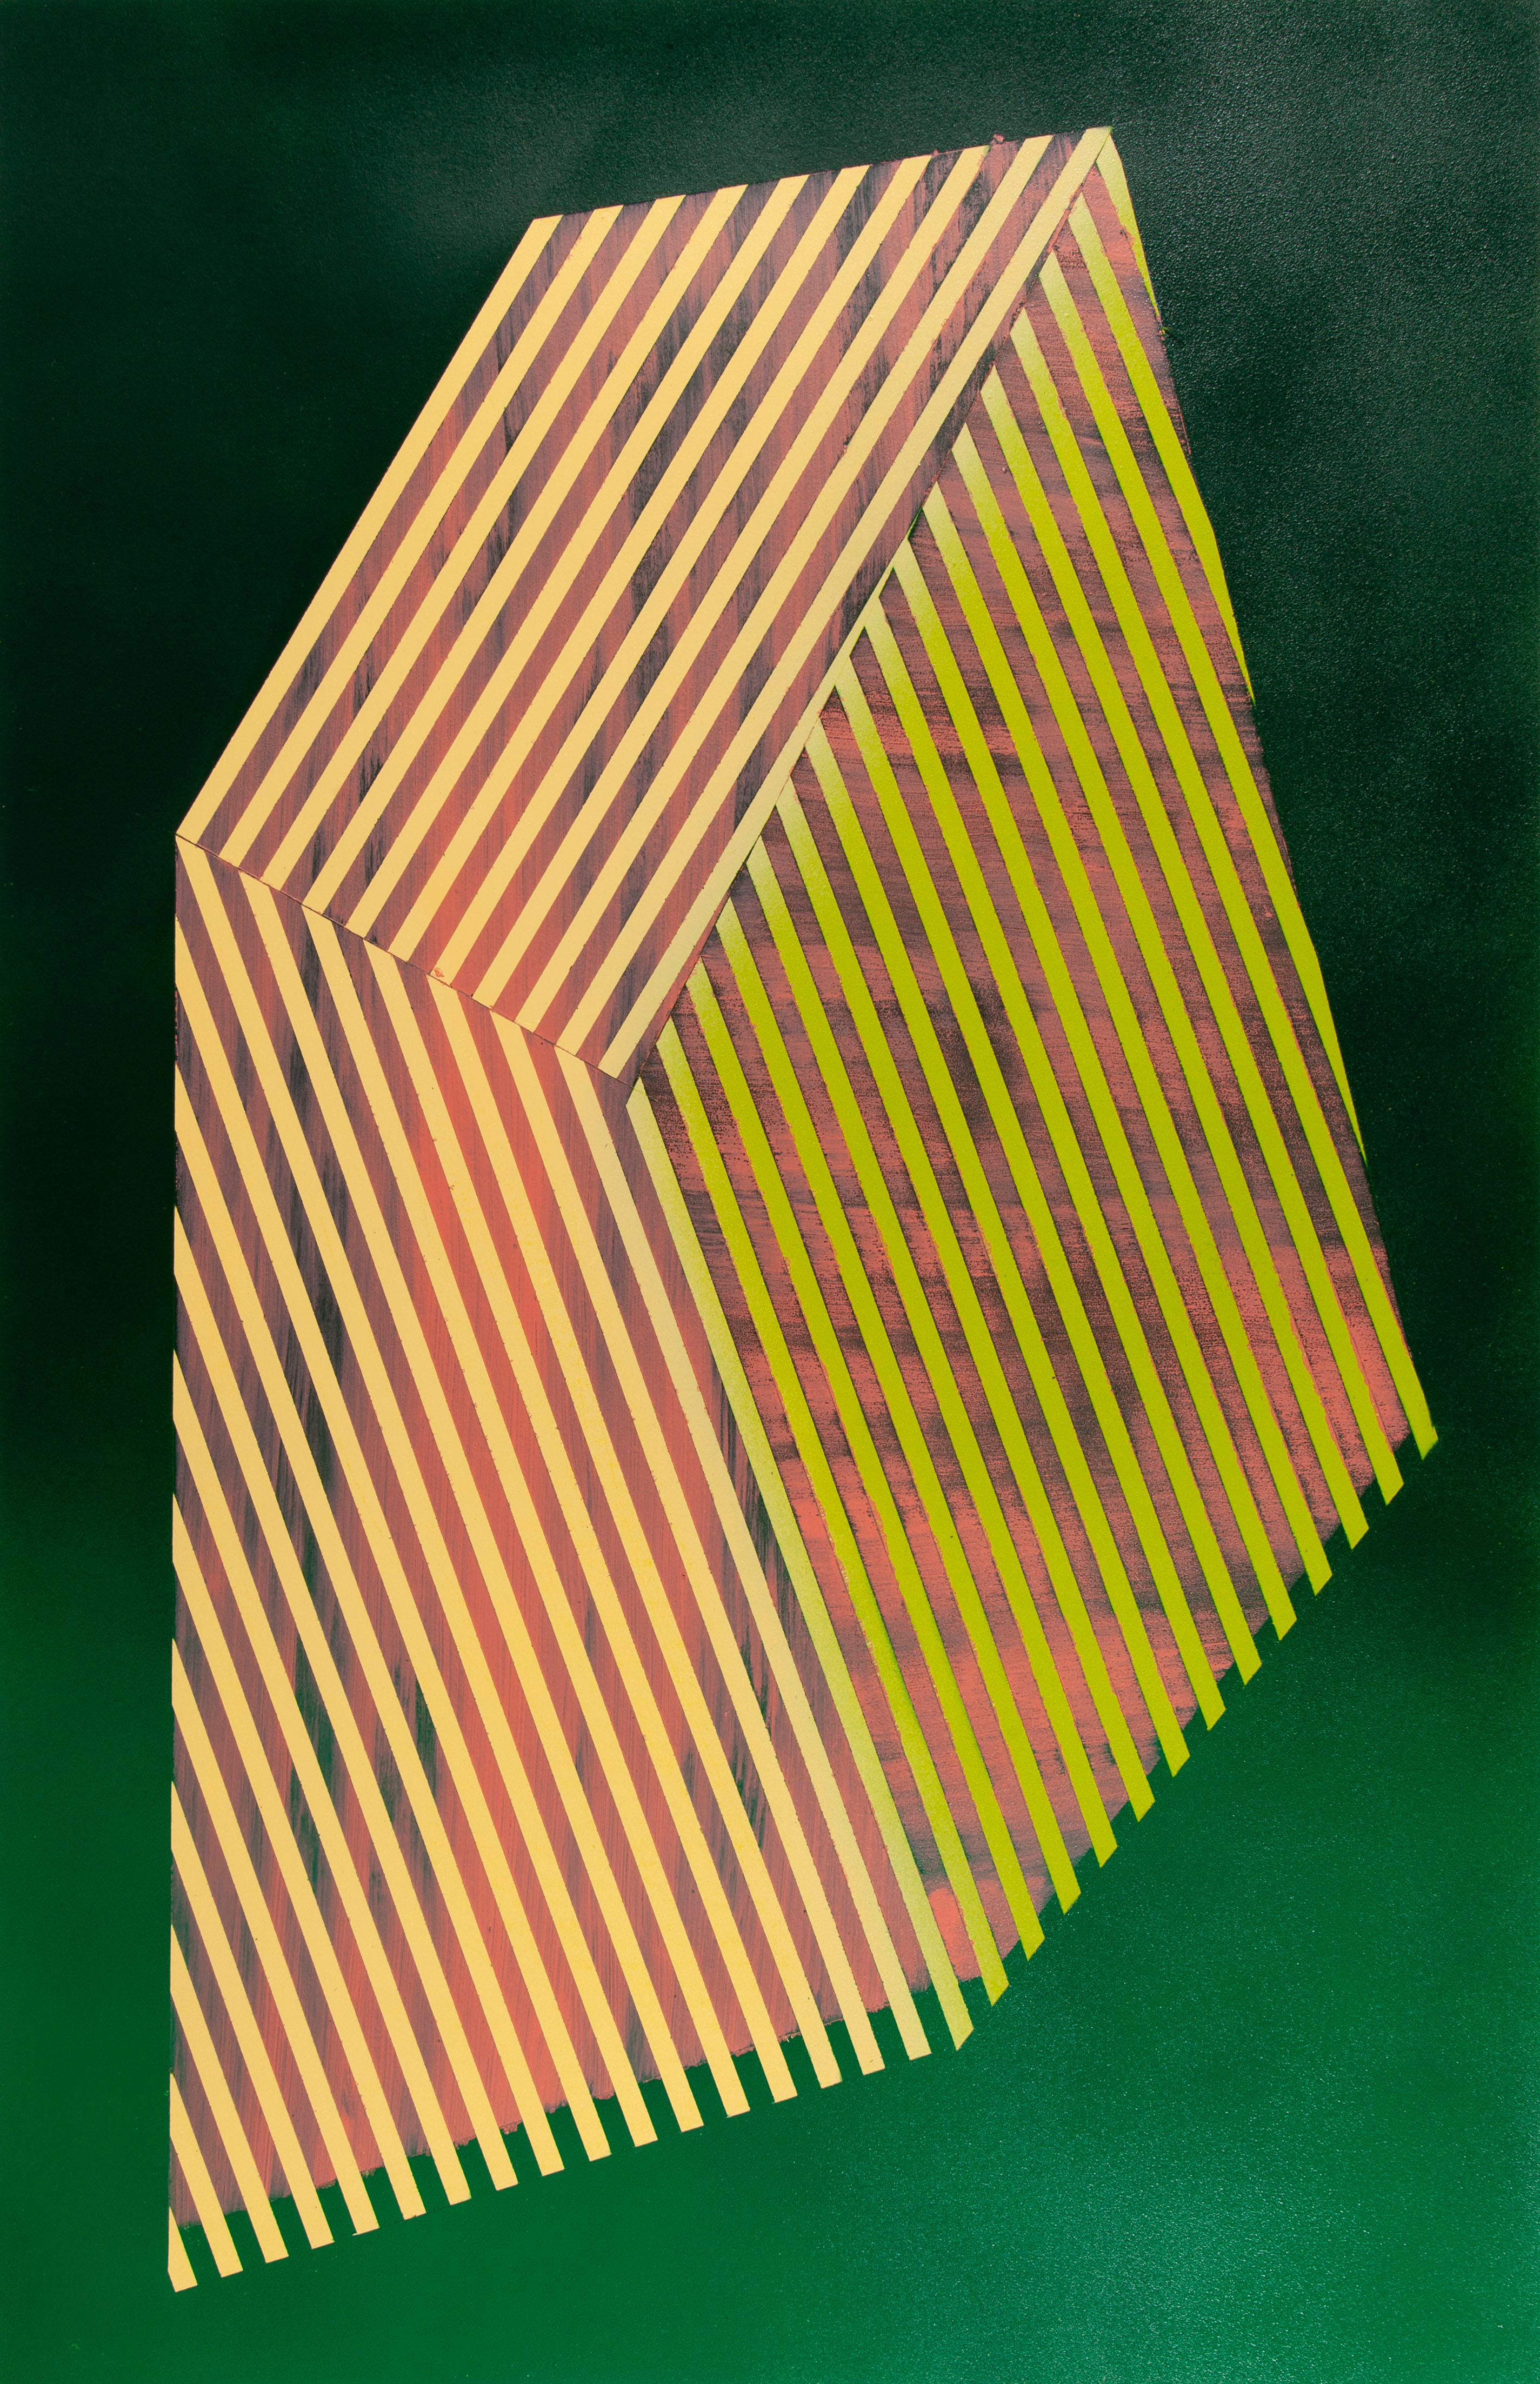 Jay Walker Abstract Painting - Prismatic Polygon XIX: geometric abstract painting w/ pattern. Gold, green ombre